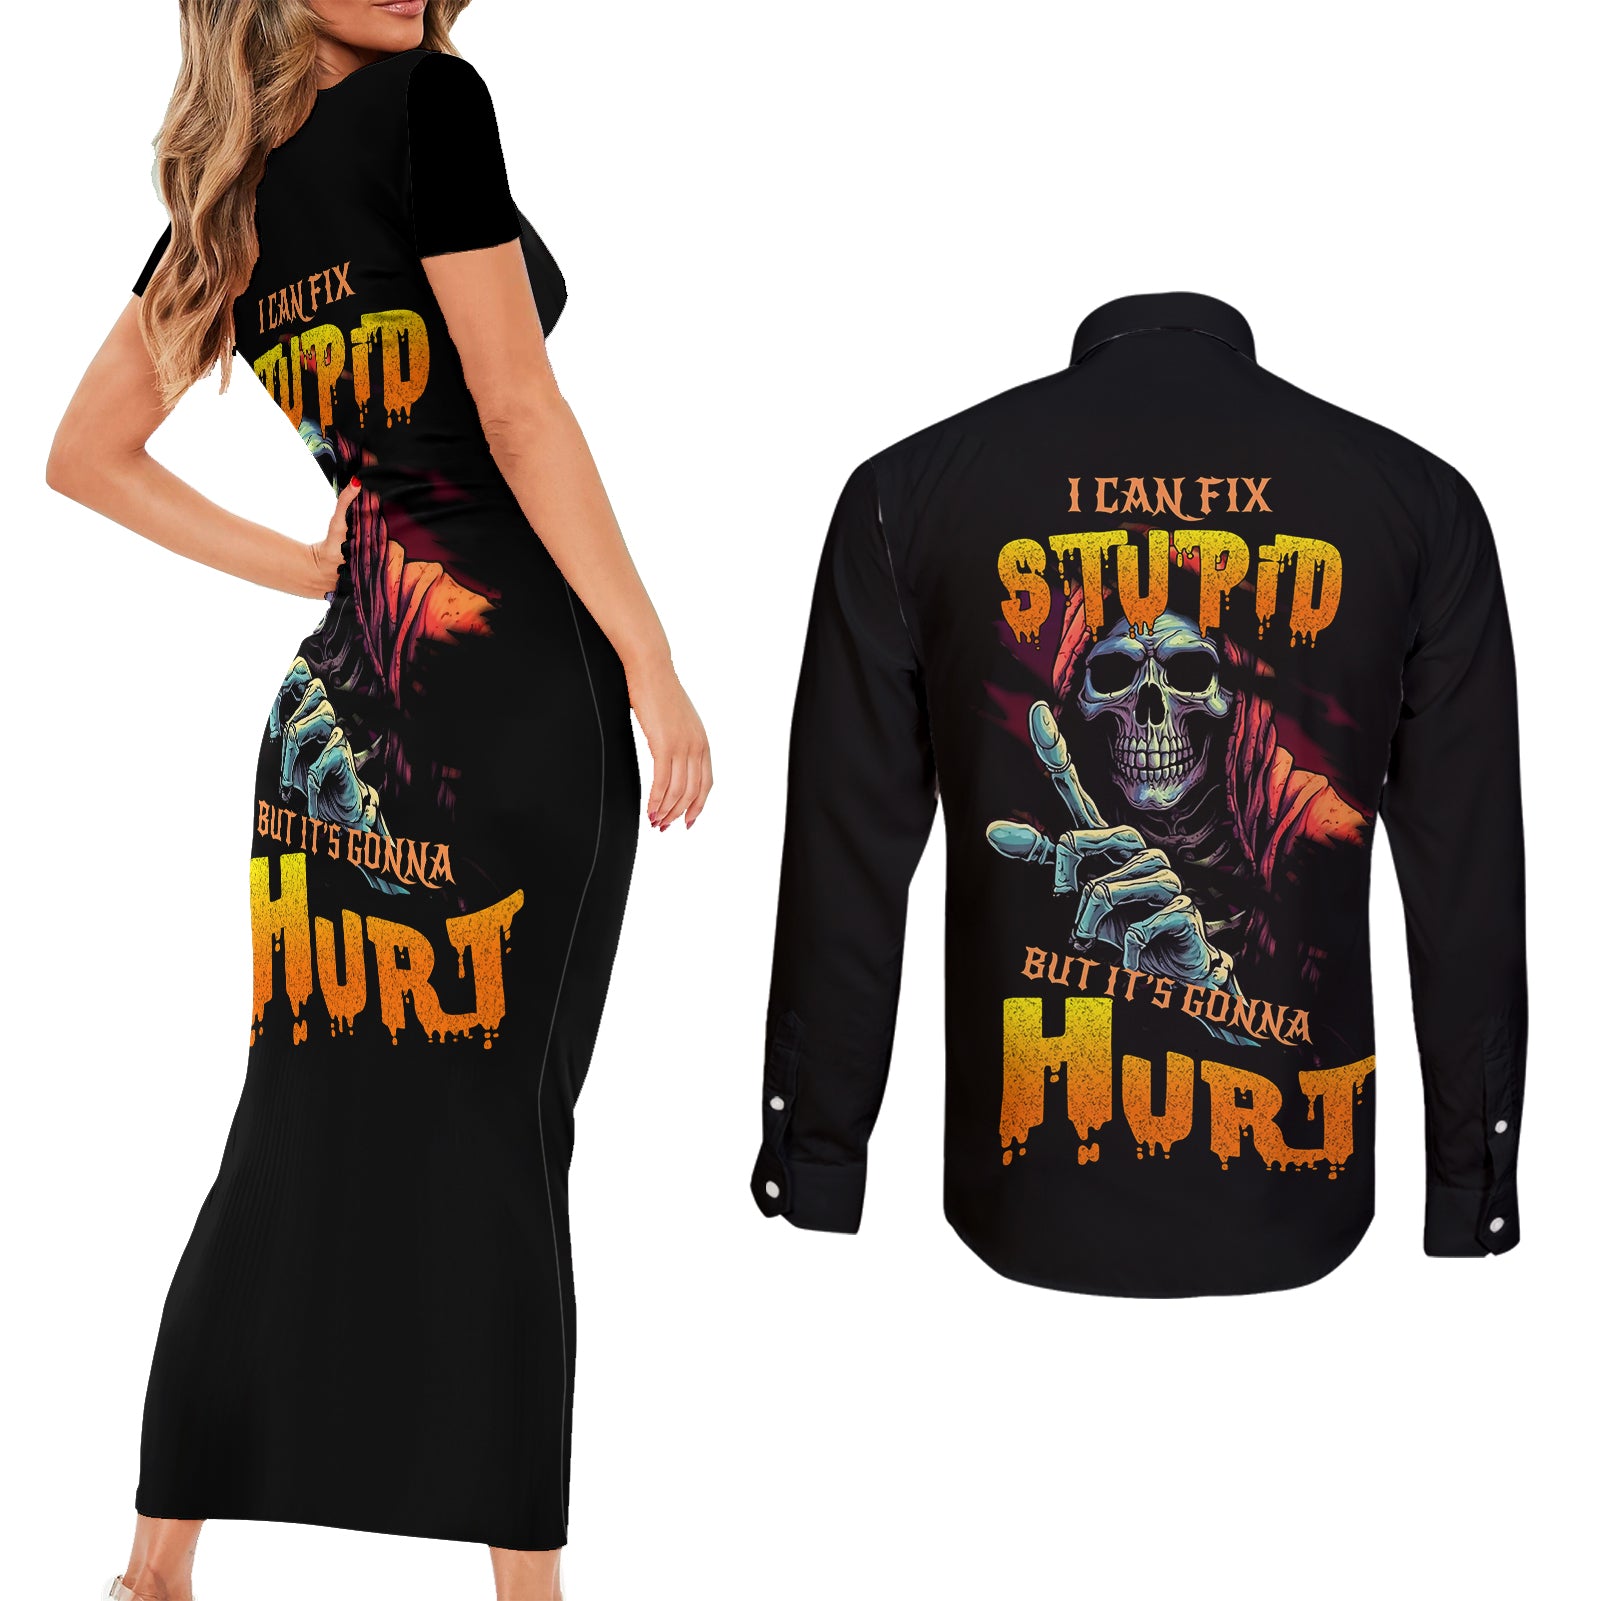 reaper-skull-couples-matching-short-sleeve-bodycon-dress-and-long-sleeve-button-shirts-i-can-fix-stupid-but-its-gonna-hurt